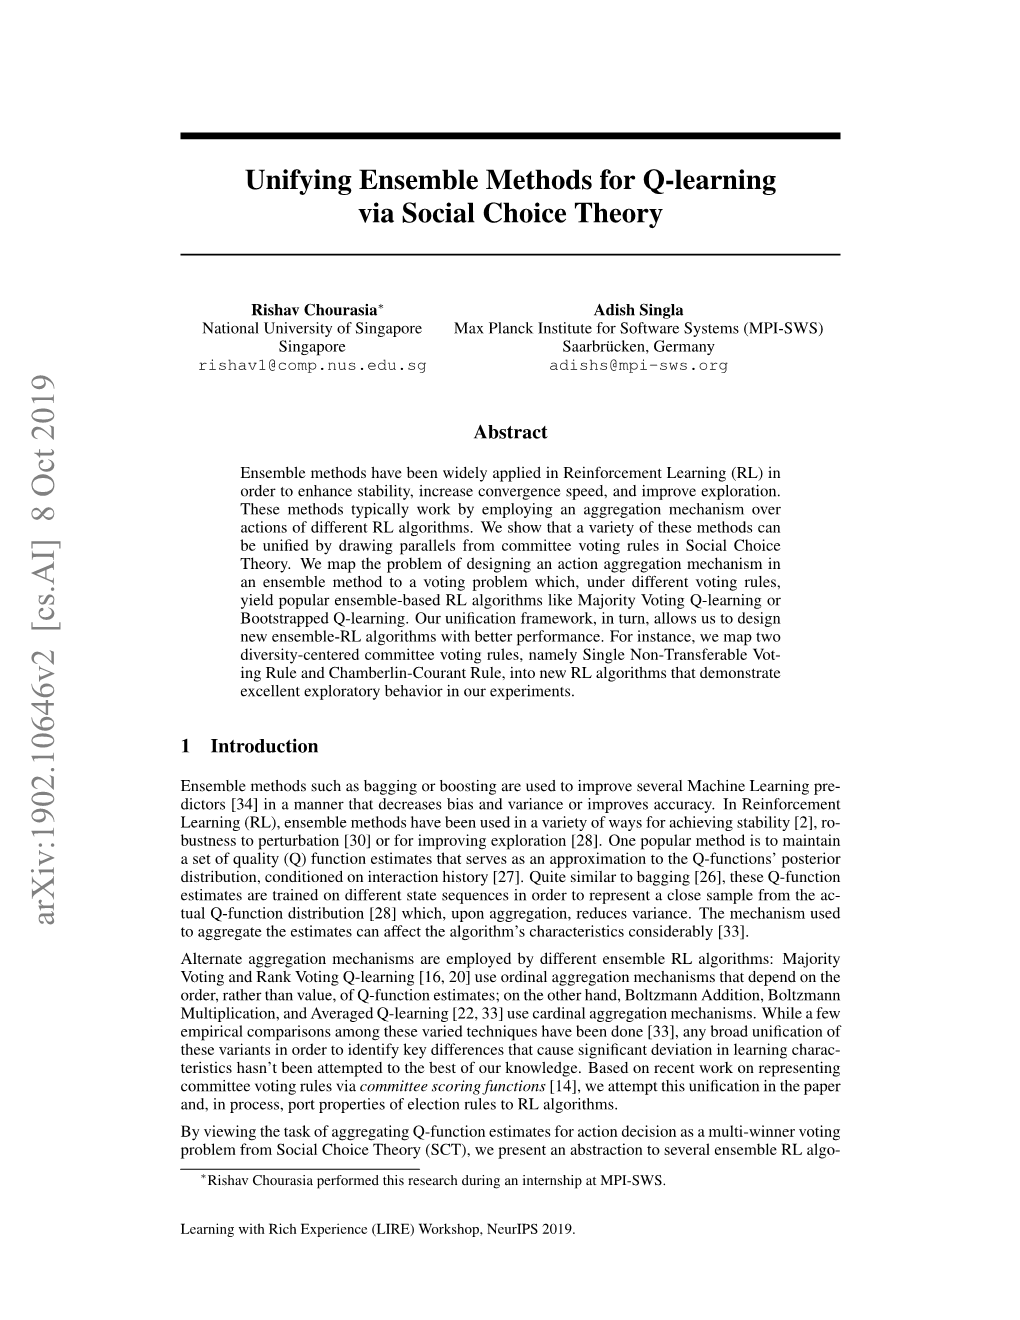 Unifying Ensemble Methods for Q-Learning Via Social Choice Theory